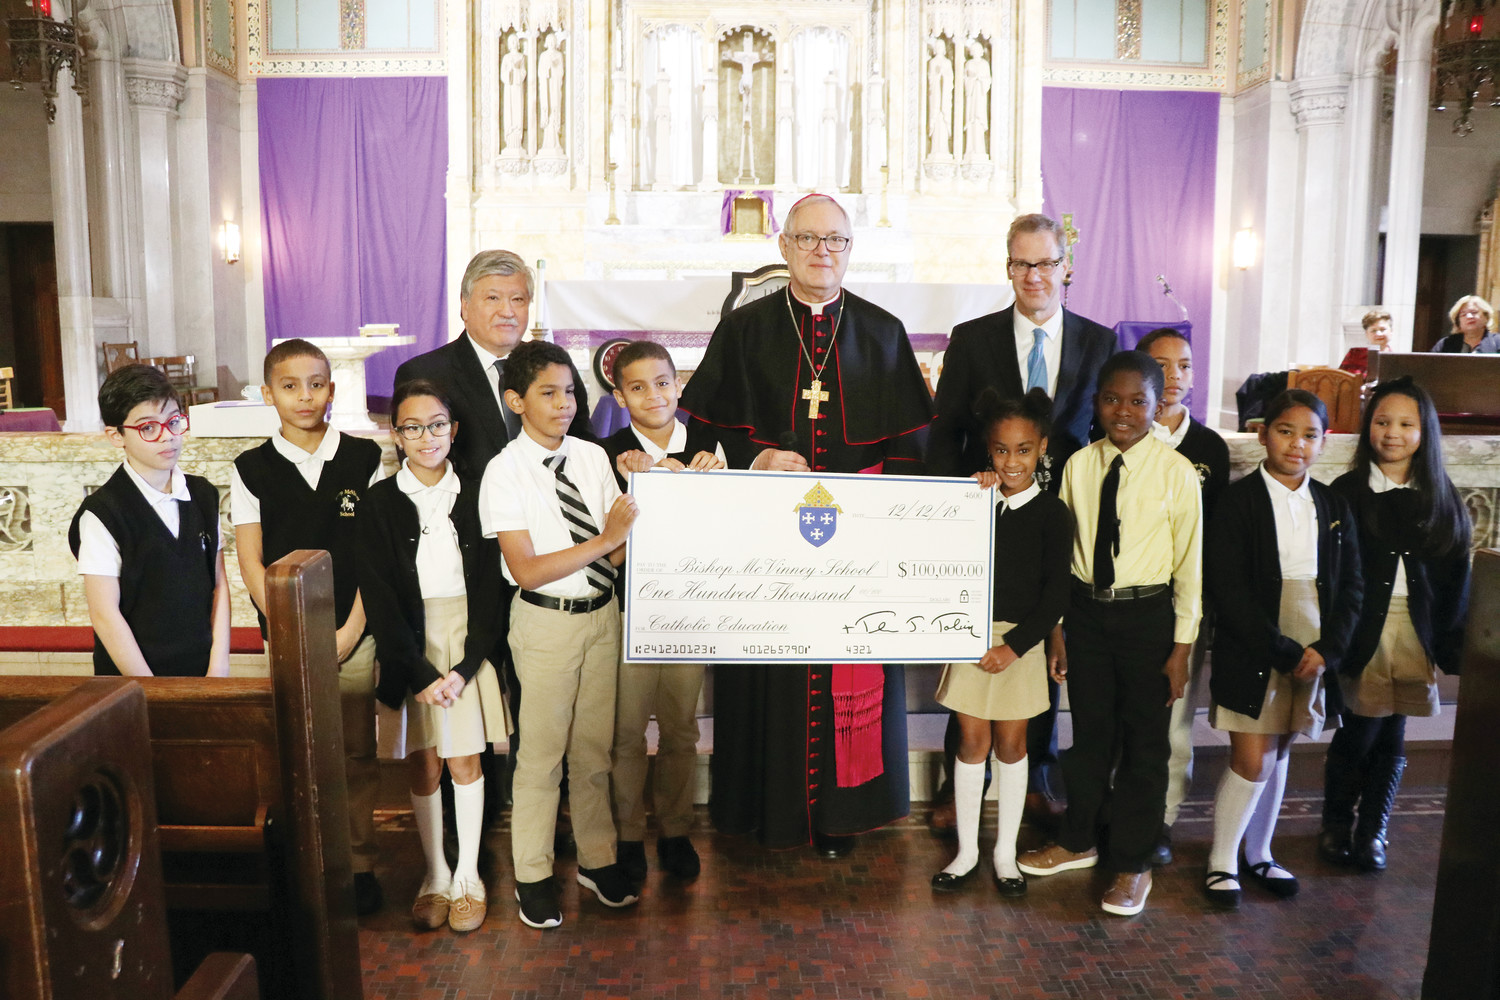 Bishop Thomas J. Tobin presents Bishop McVinney School in Providence with a $100,000 donation from the Diocese of Providence to help pay for improvements at the inner-city school.